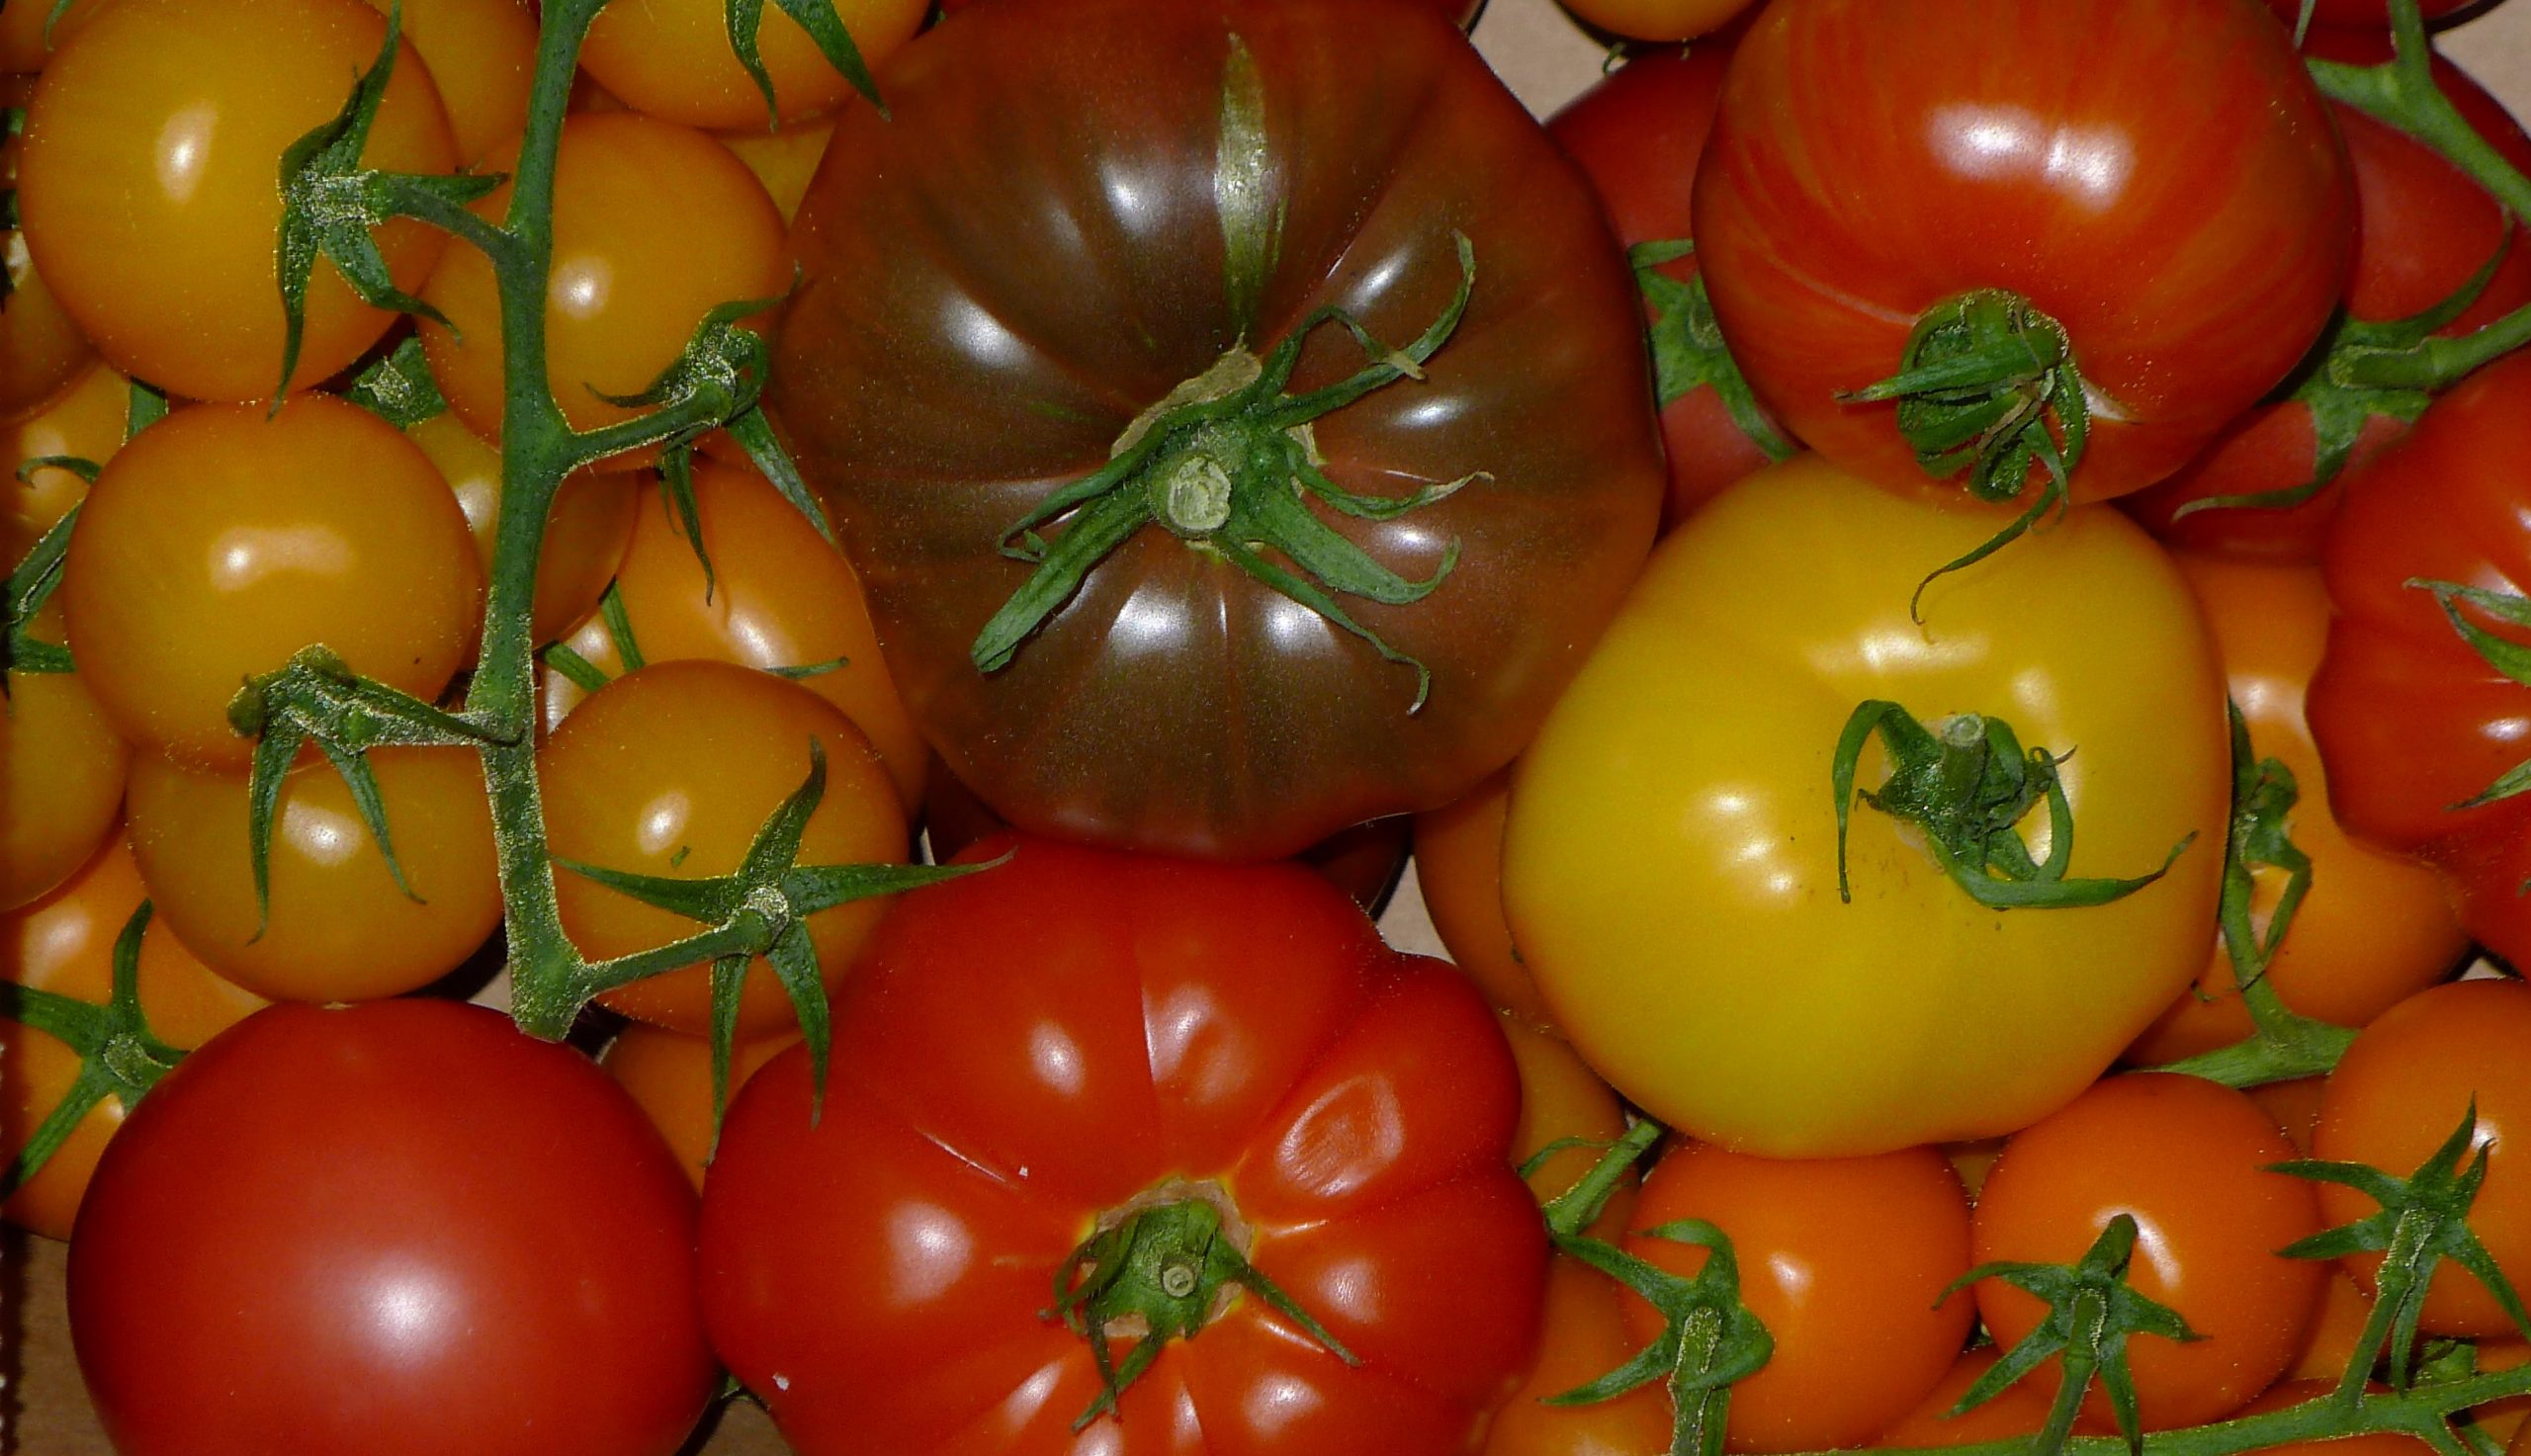 The tomato category is the world’s largest vegetable category, representing 16%. It is also a very fast growing category with an increase in production of 49% between 2000 and 2013.